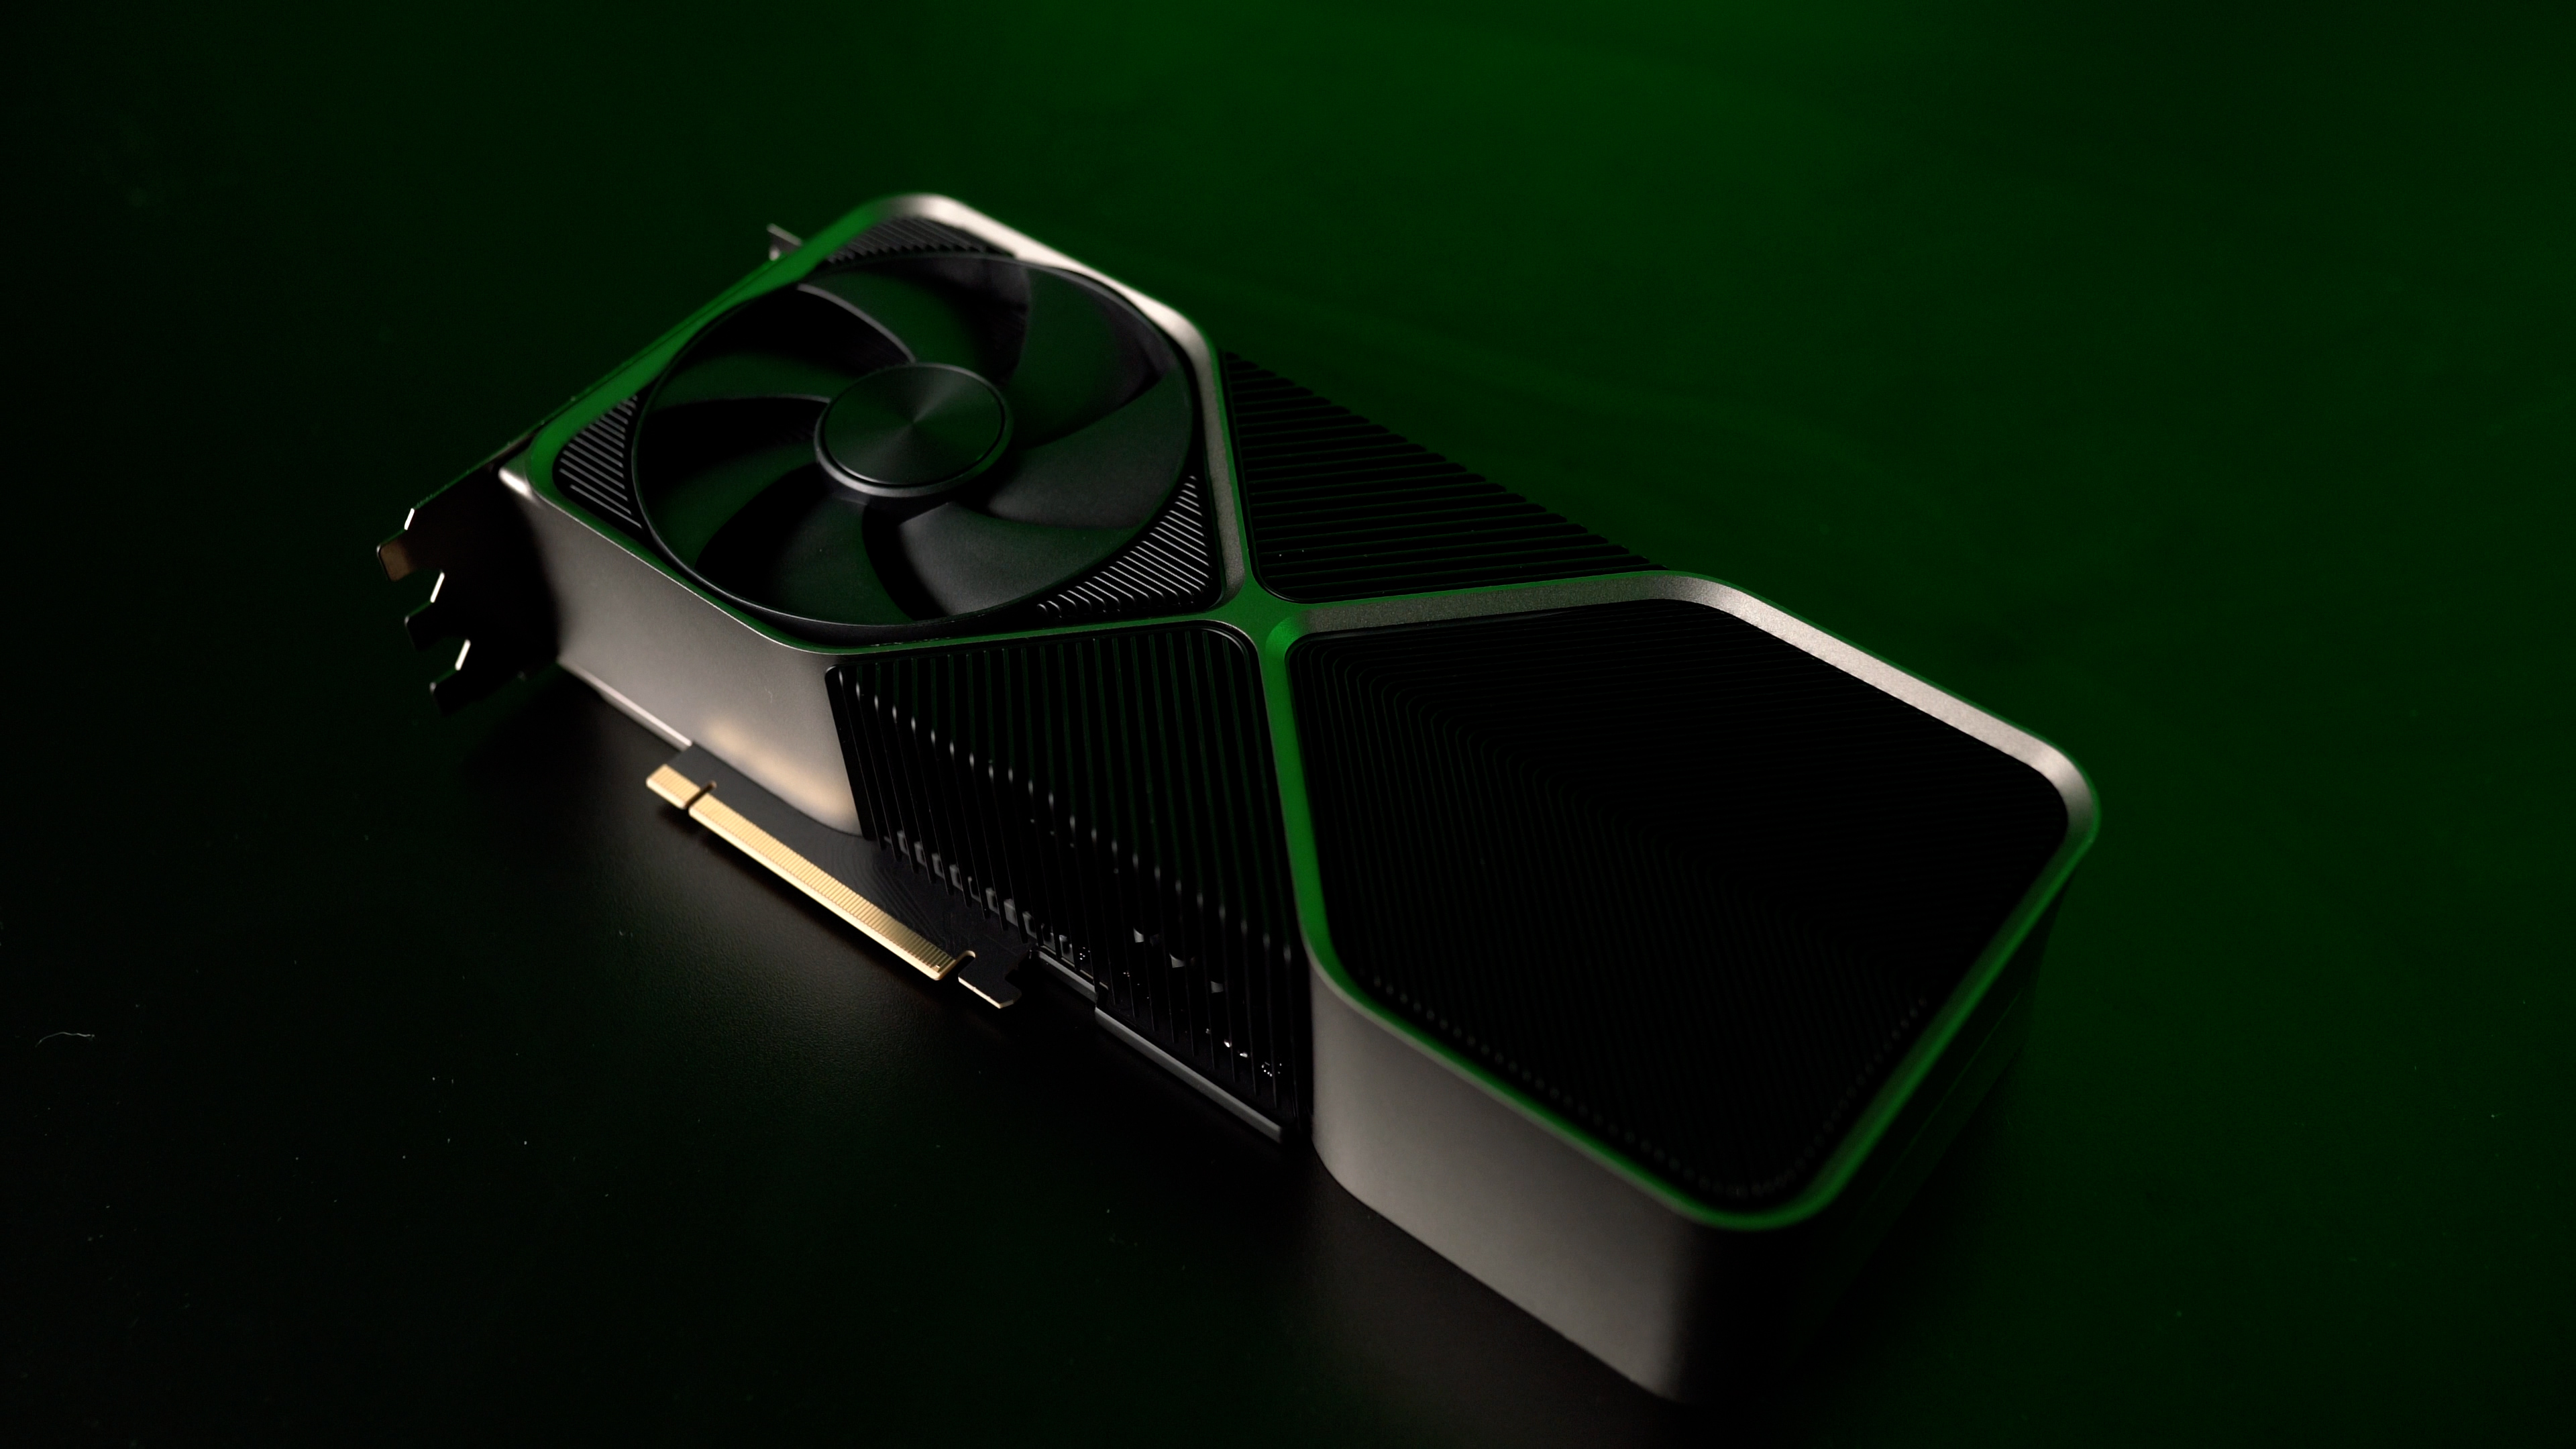 The RTX 4090 graphics card sitting on a table with a dark green background.